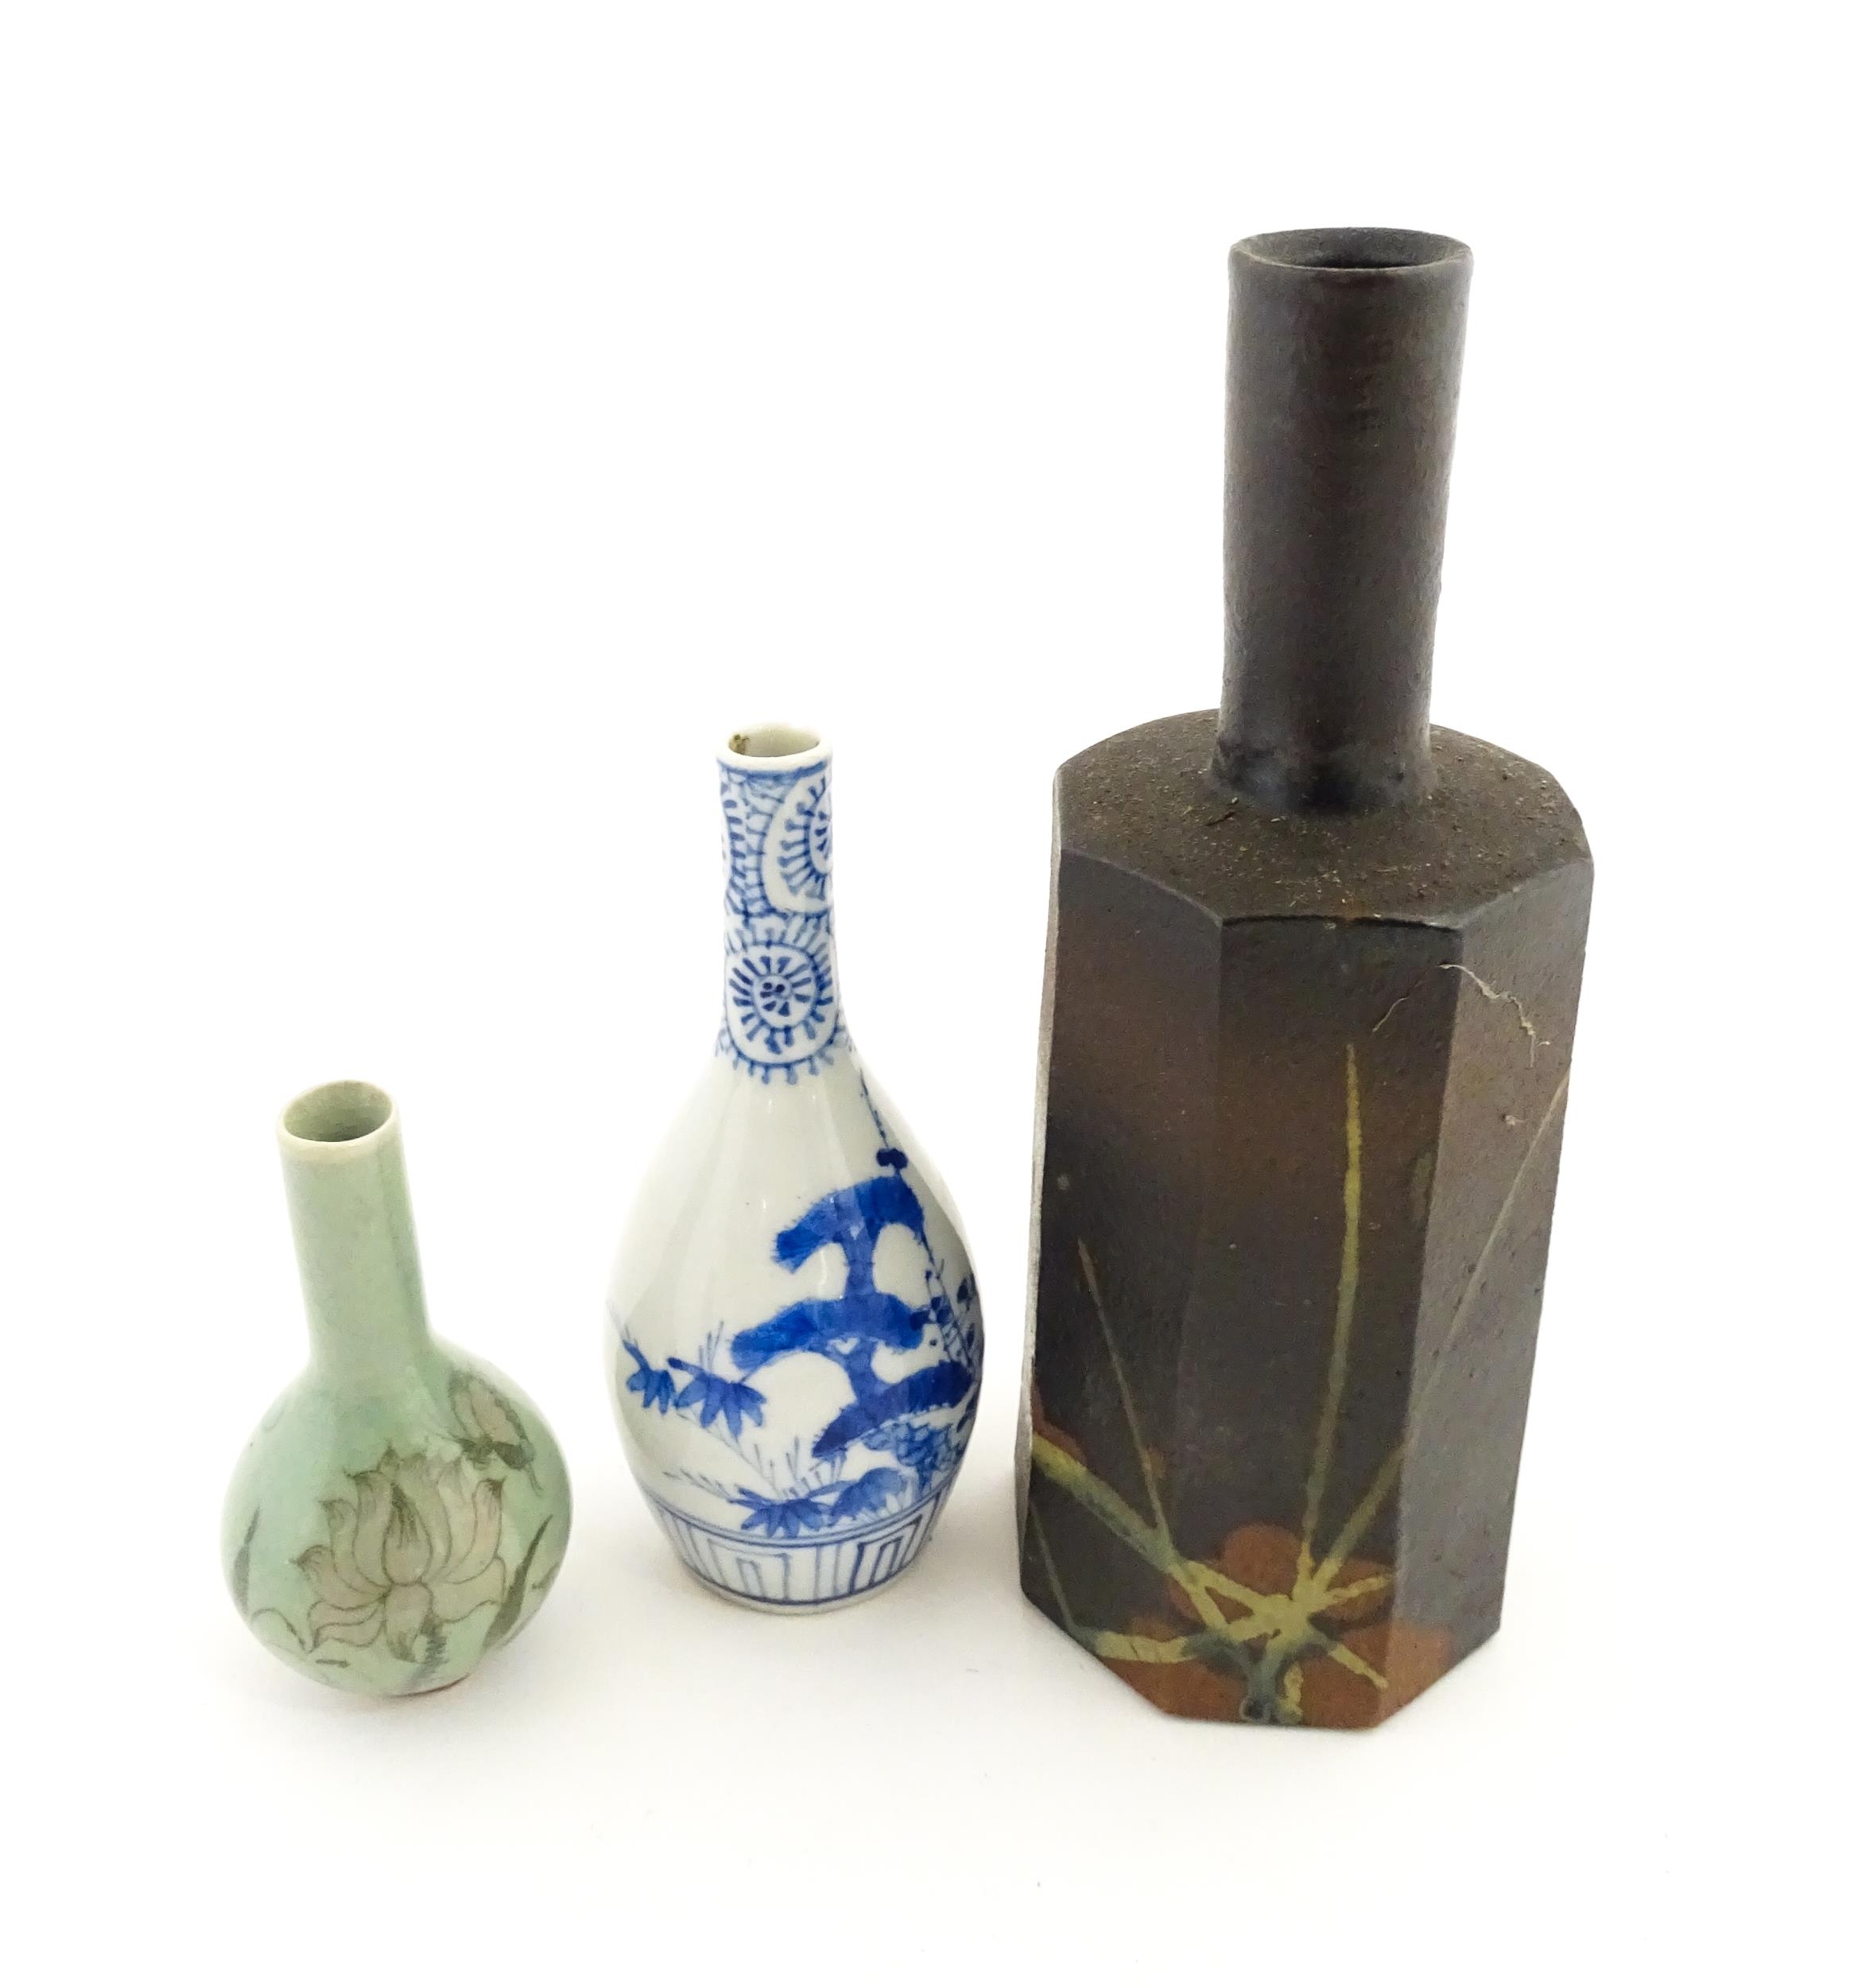 A Japanese studio pottery vase with octagonal body, elongated neck and brushwork detail. Together